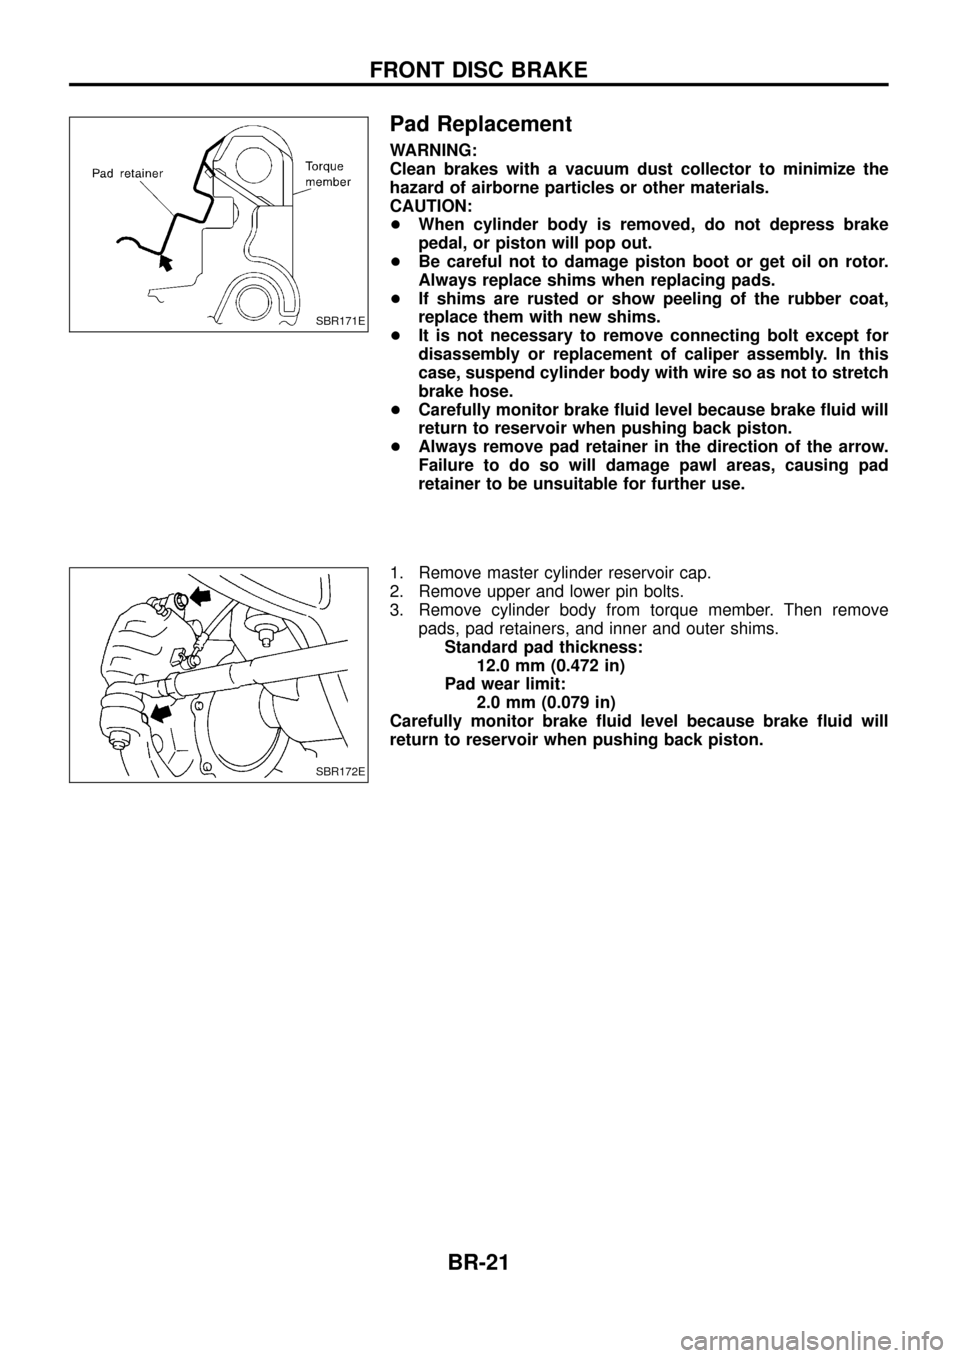 NISSAN PATROL 1998 Y61 / 5.G Brake System Owners Manual Pad Replacement
WARNING:
Clean brakes with a vacuum dust collector to minimize the
hazard of airborne particles or other materials.
CAUTION:
+When cylinder body is removed, do not depress brake
pedal,